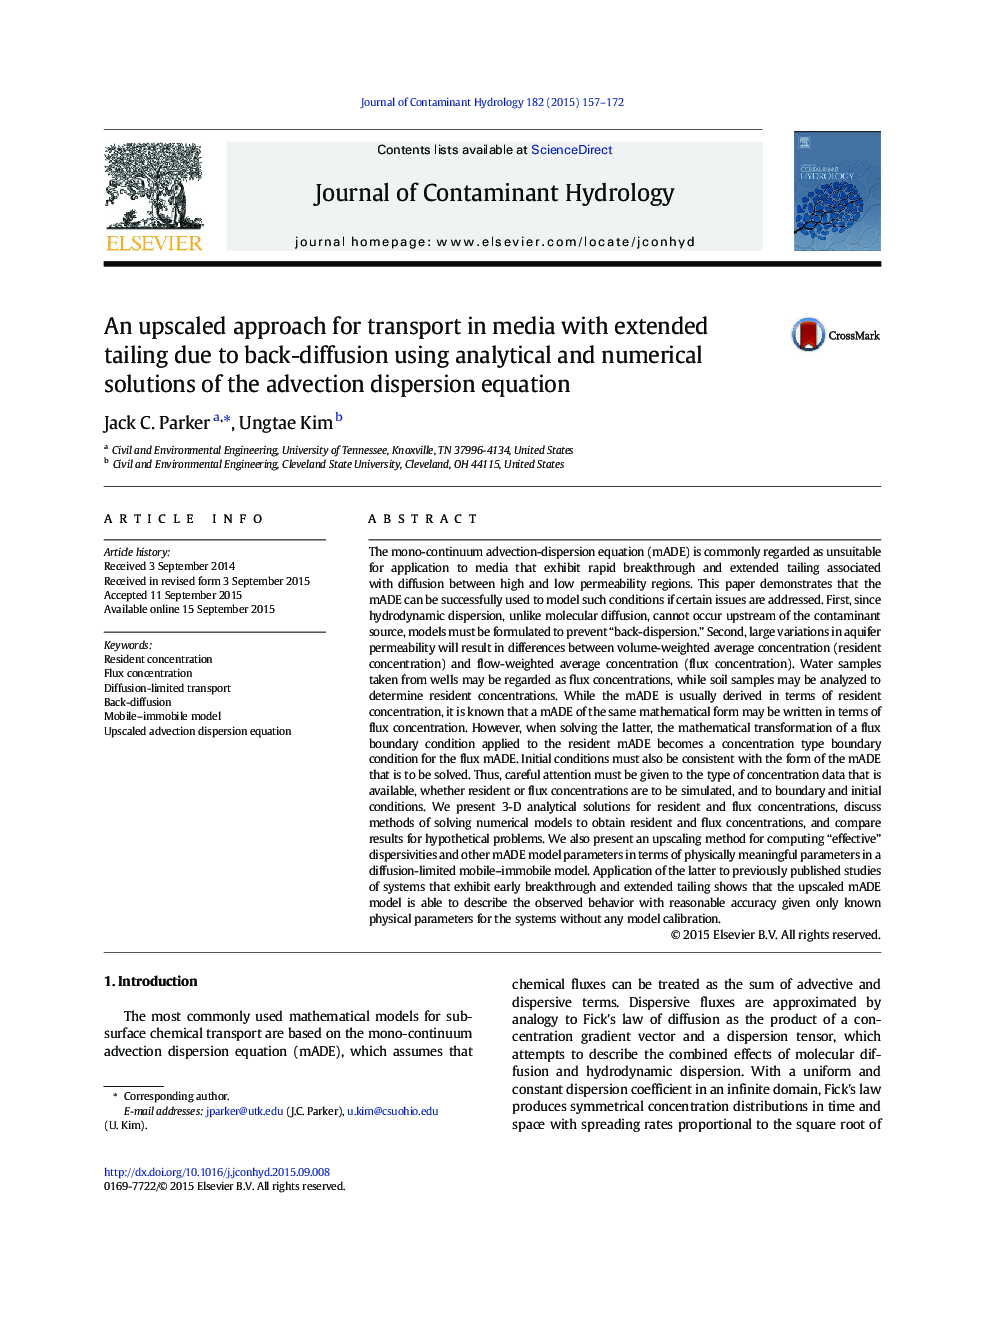 An upscaled approach for transport in media with extended tailing due to back-diffusion using analytical and numerical solutions of the advection dispersion equation